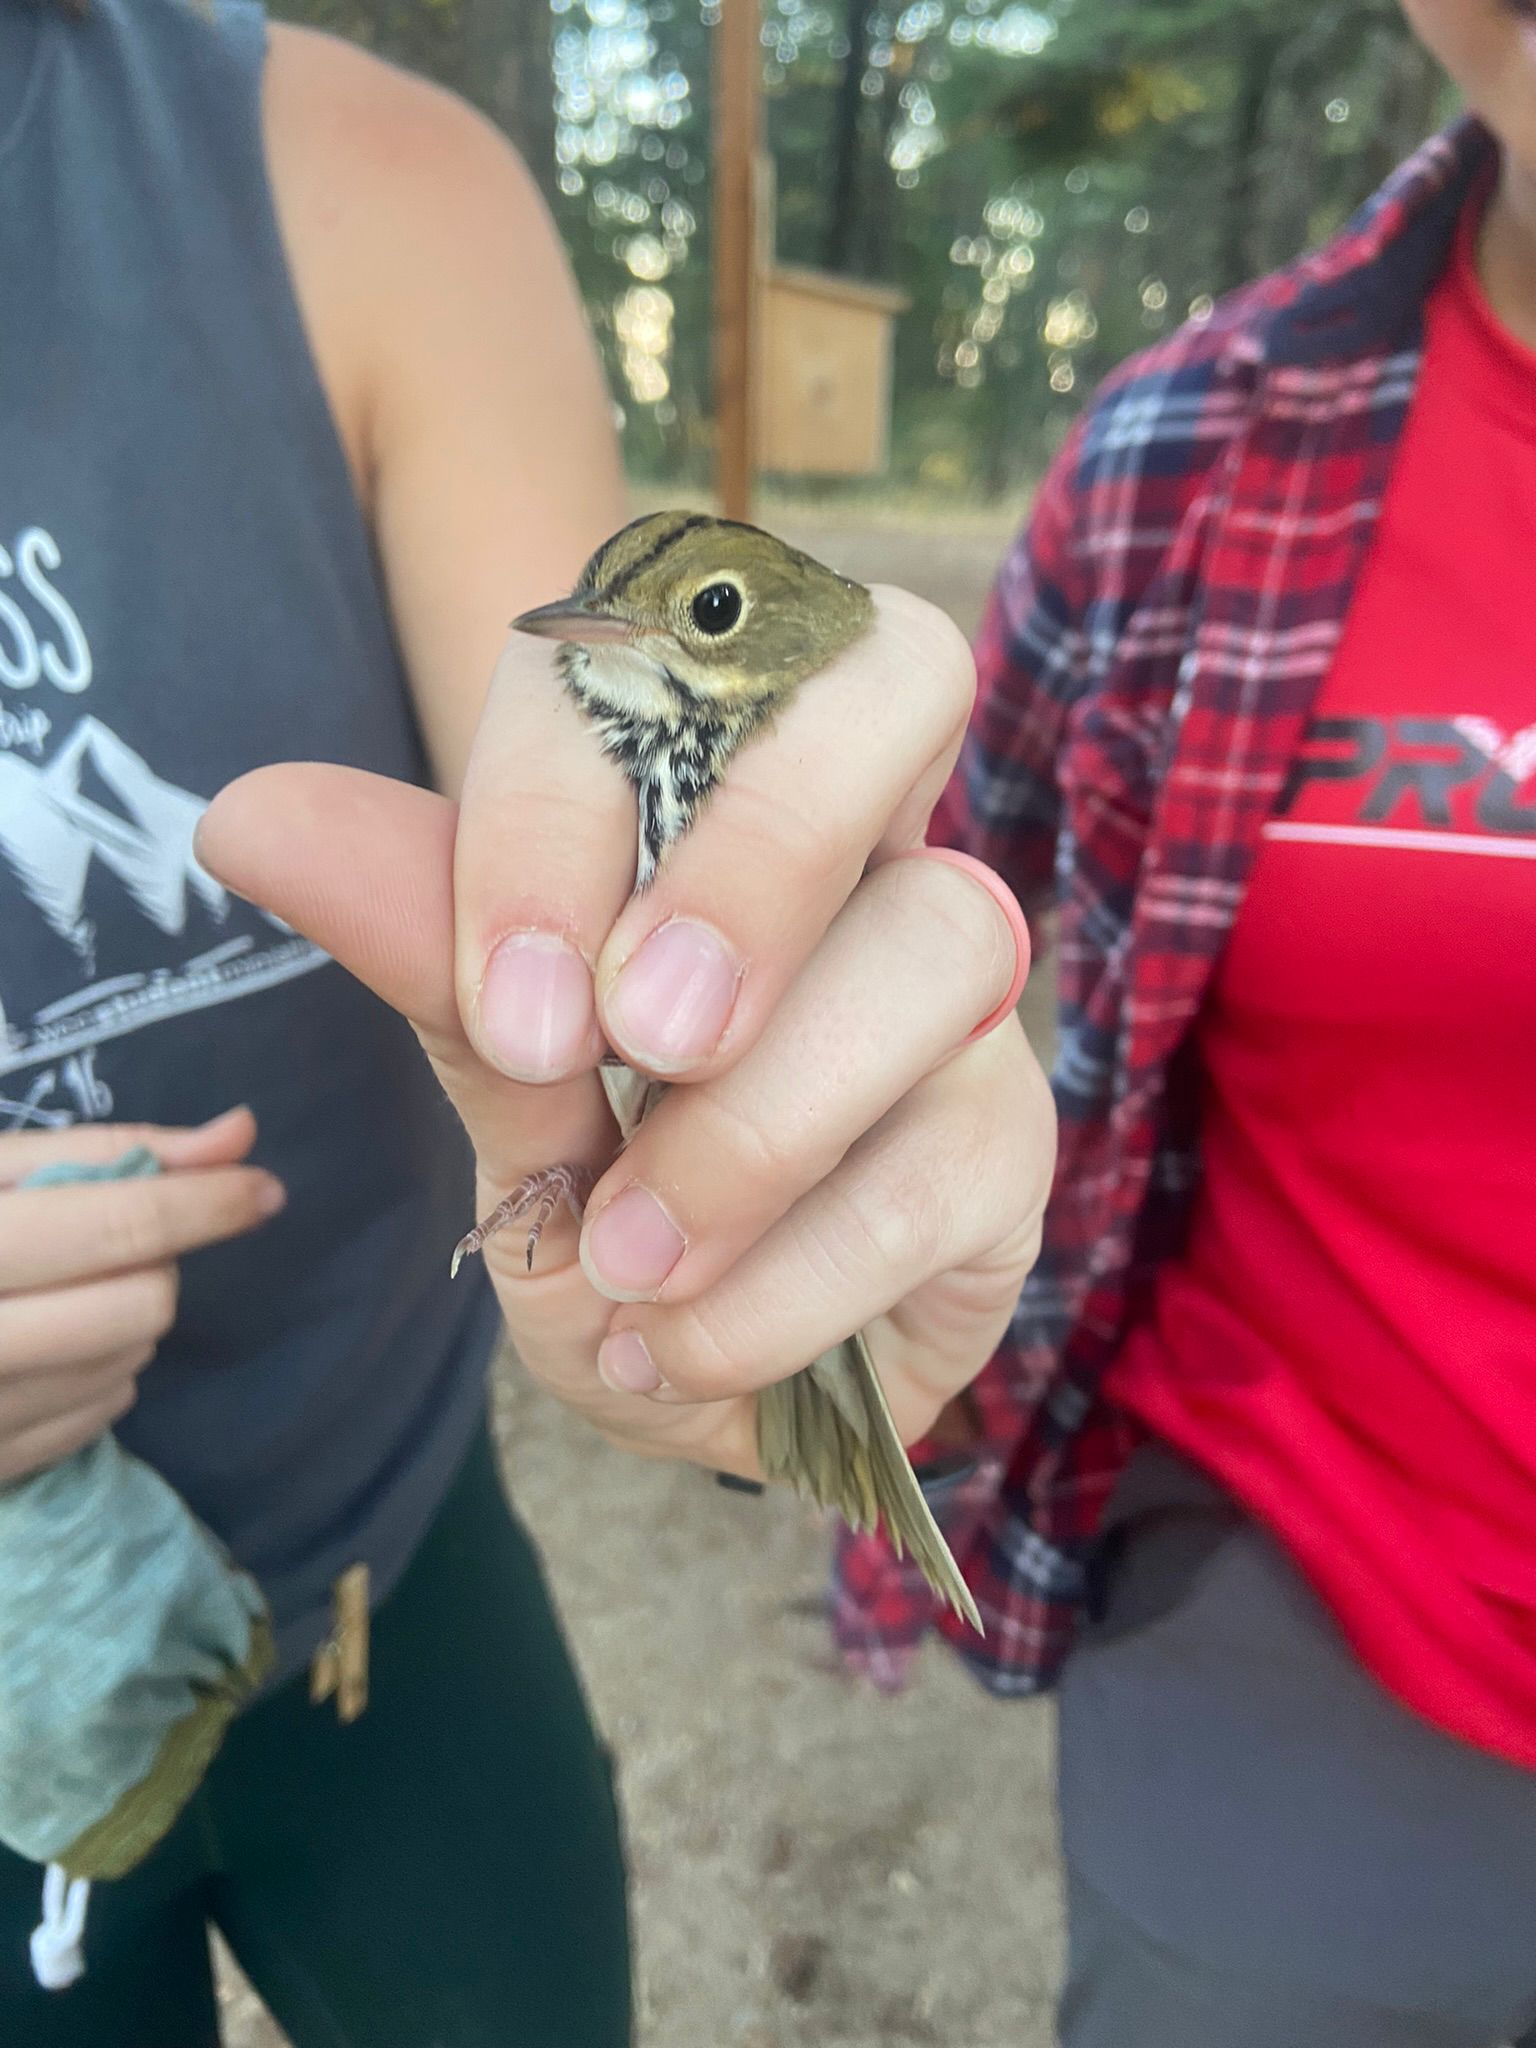 a biologist holding a small brown songbird gently in the hand